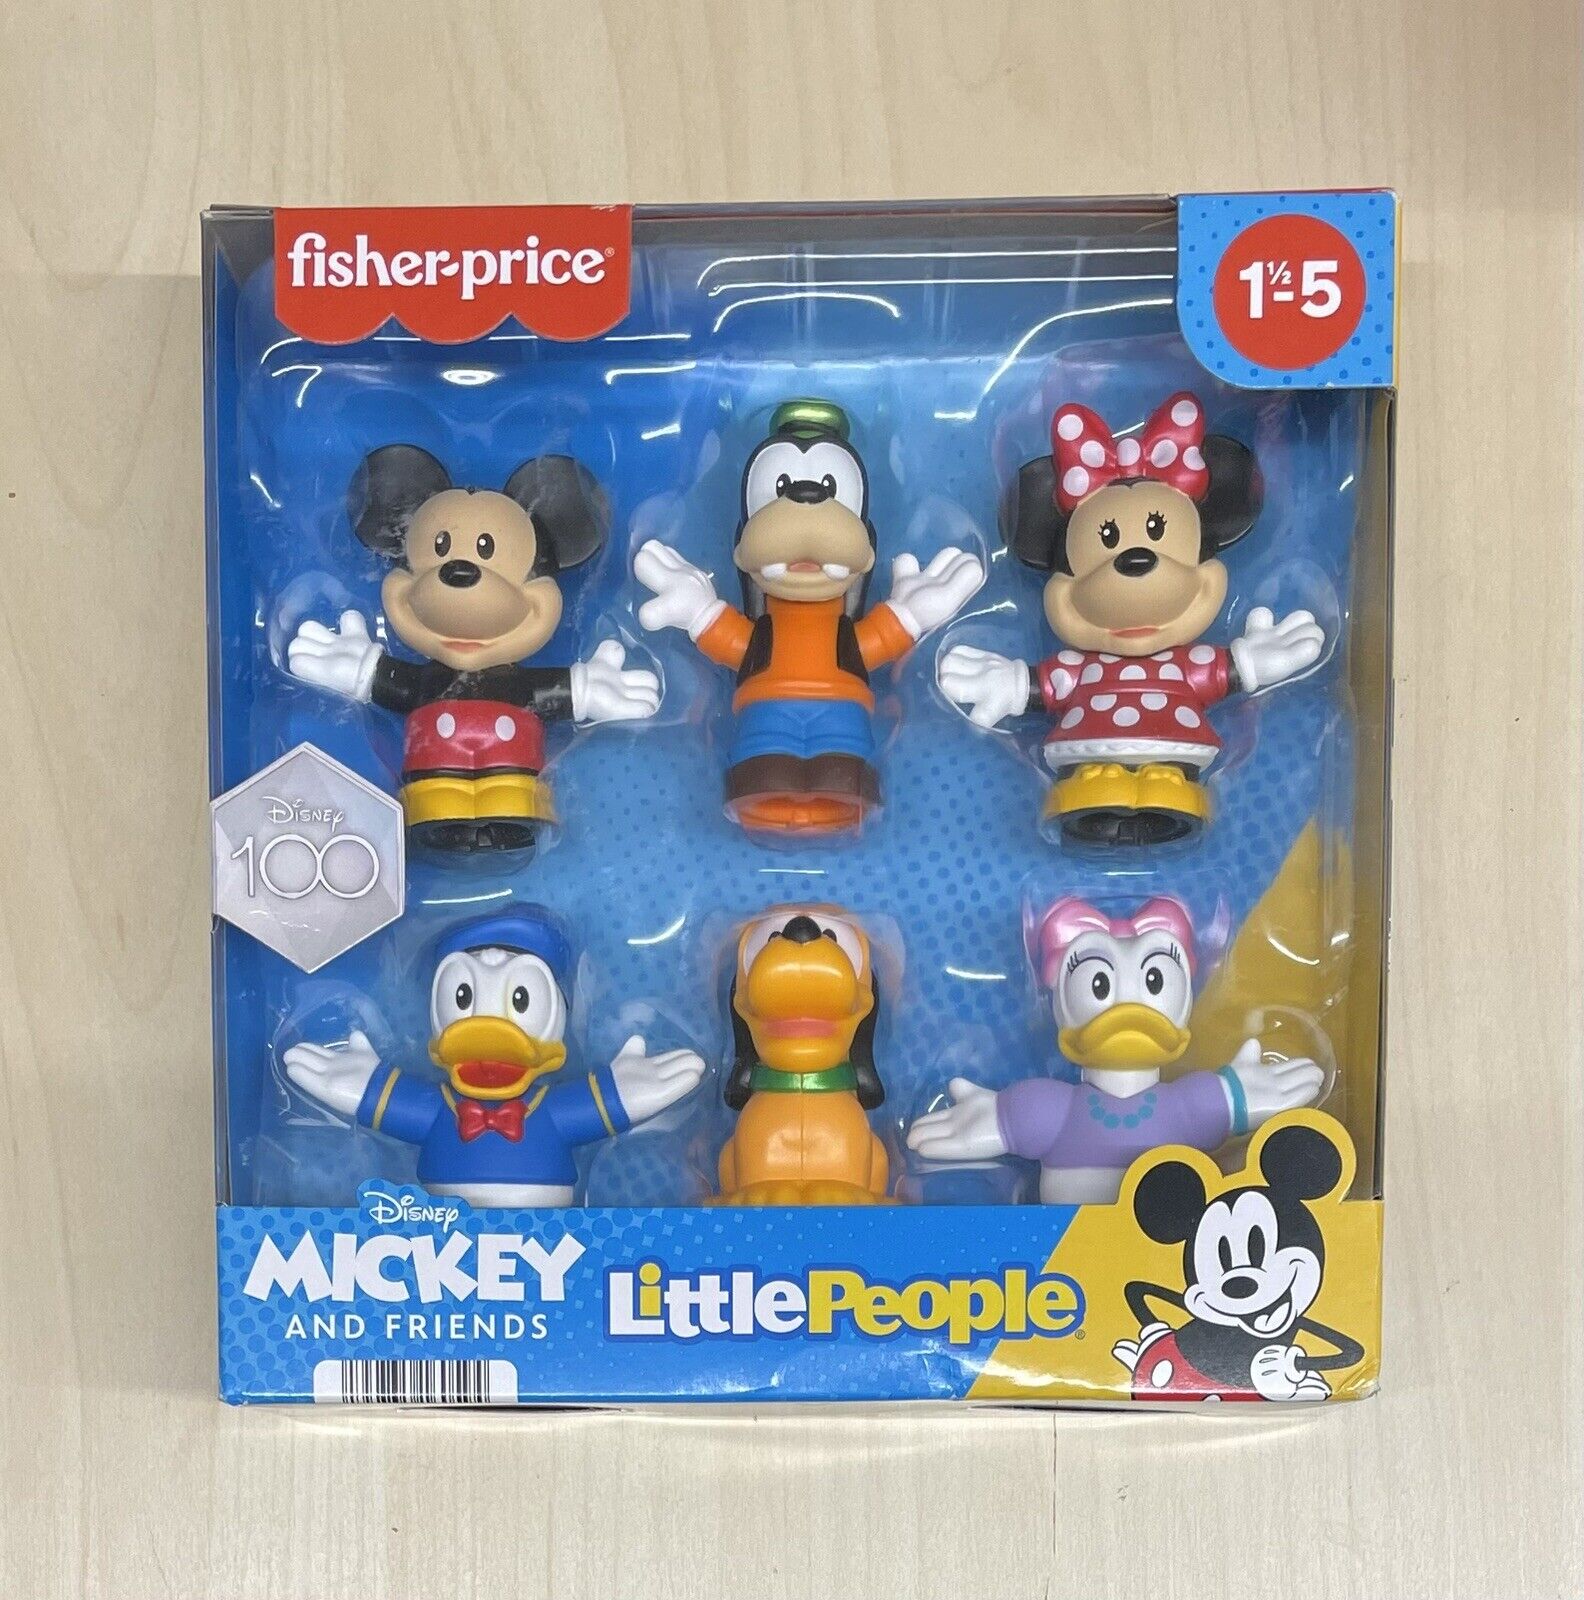 Fisher-Price Disney 100 Mickey And Friends Little People Set Of 6 FIGURES